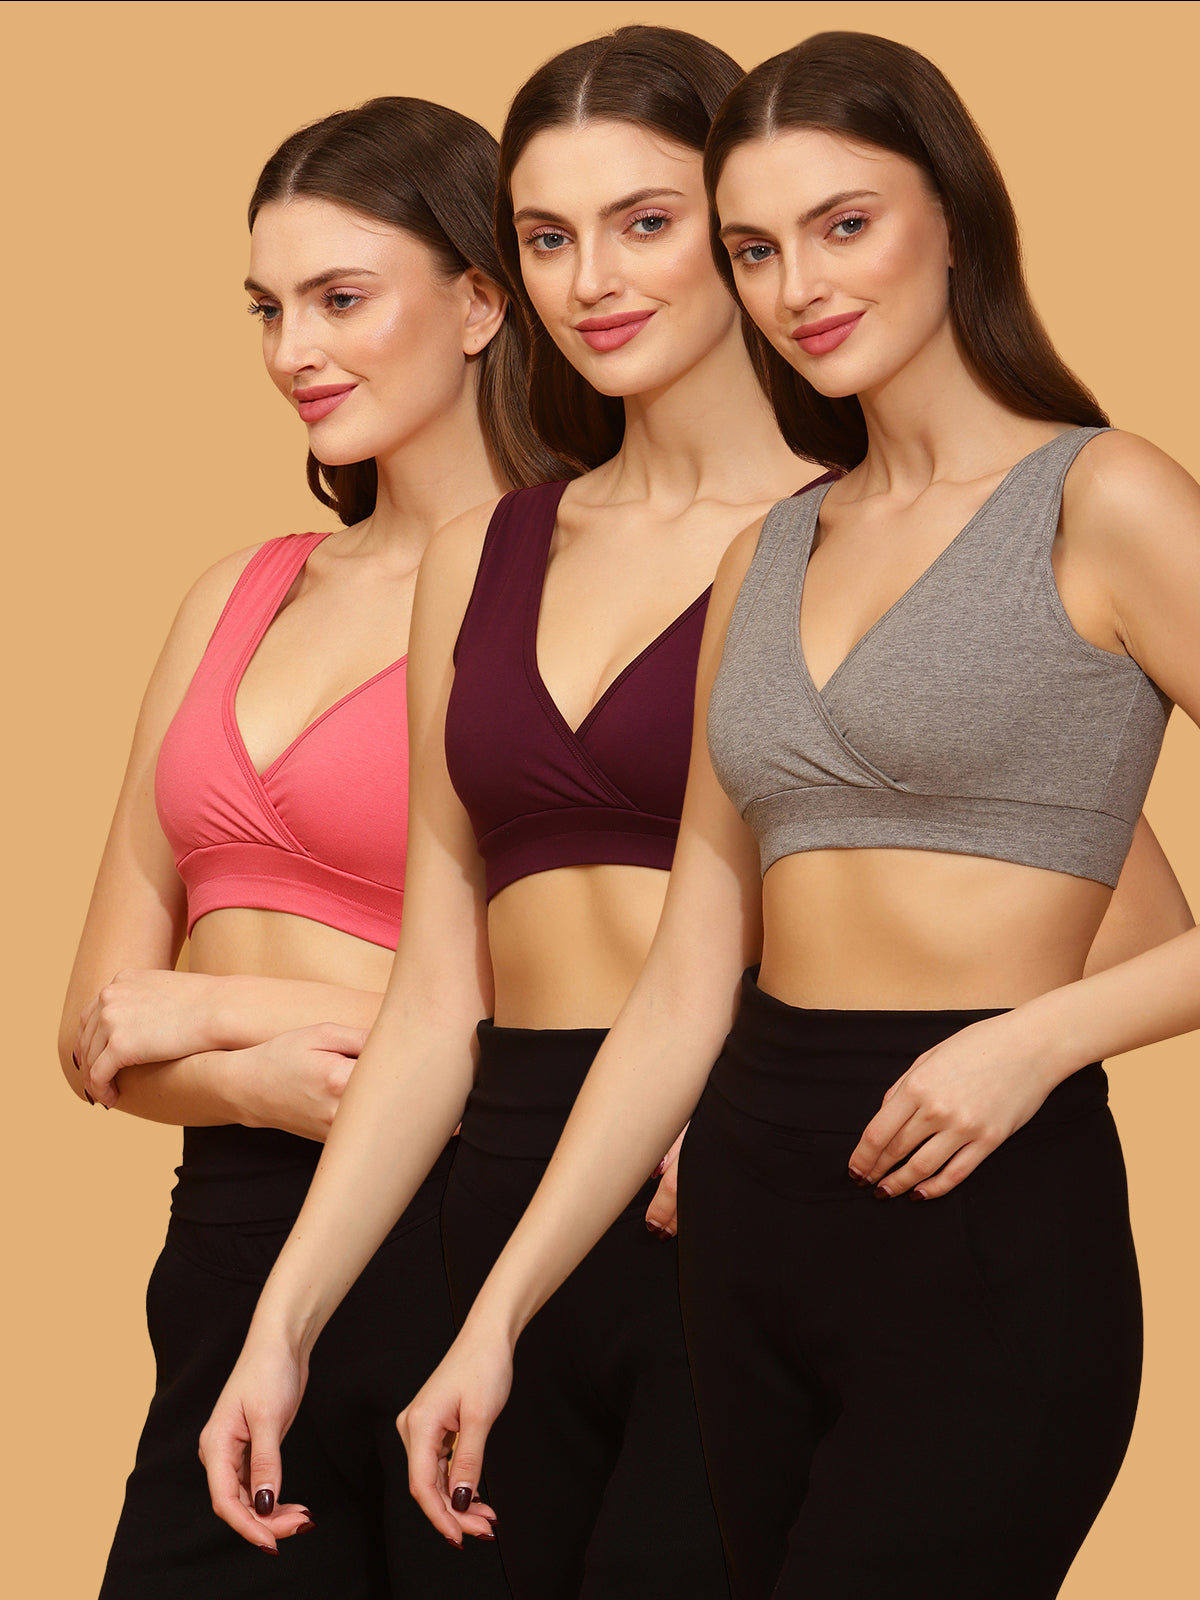 Buy 100% Cotton Maternity Bras - Pack of 3